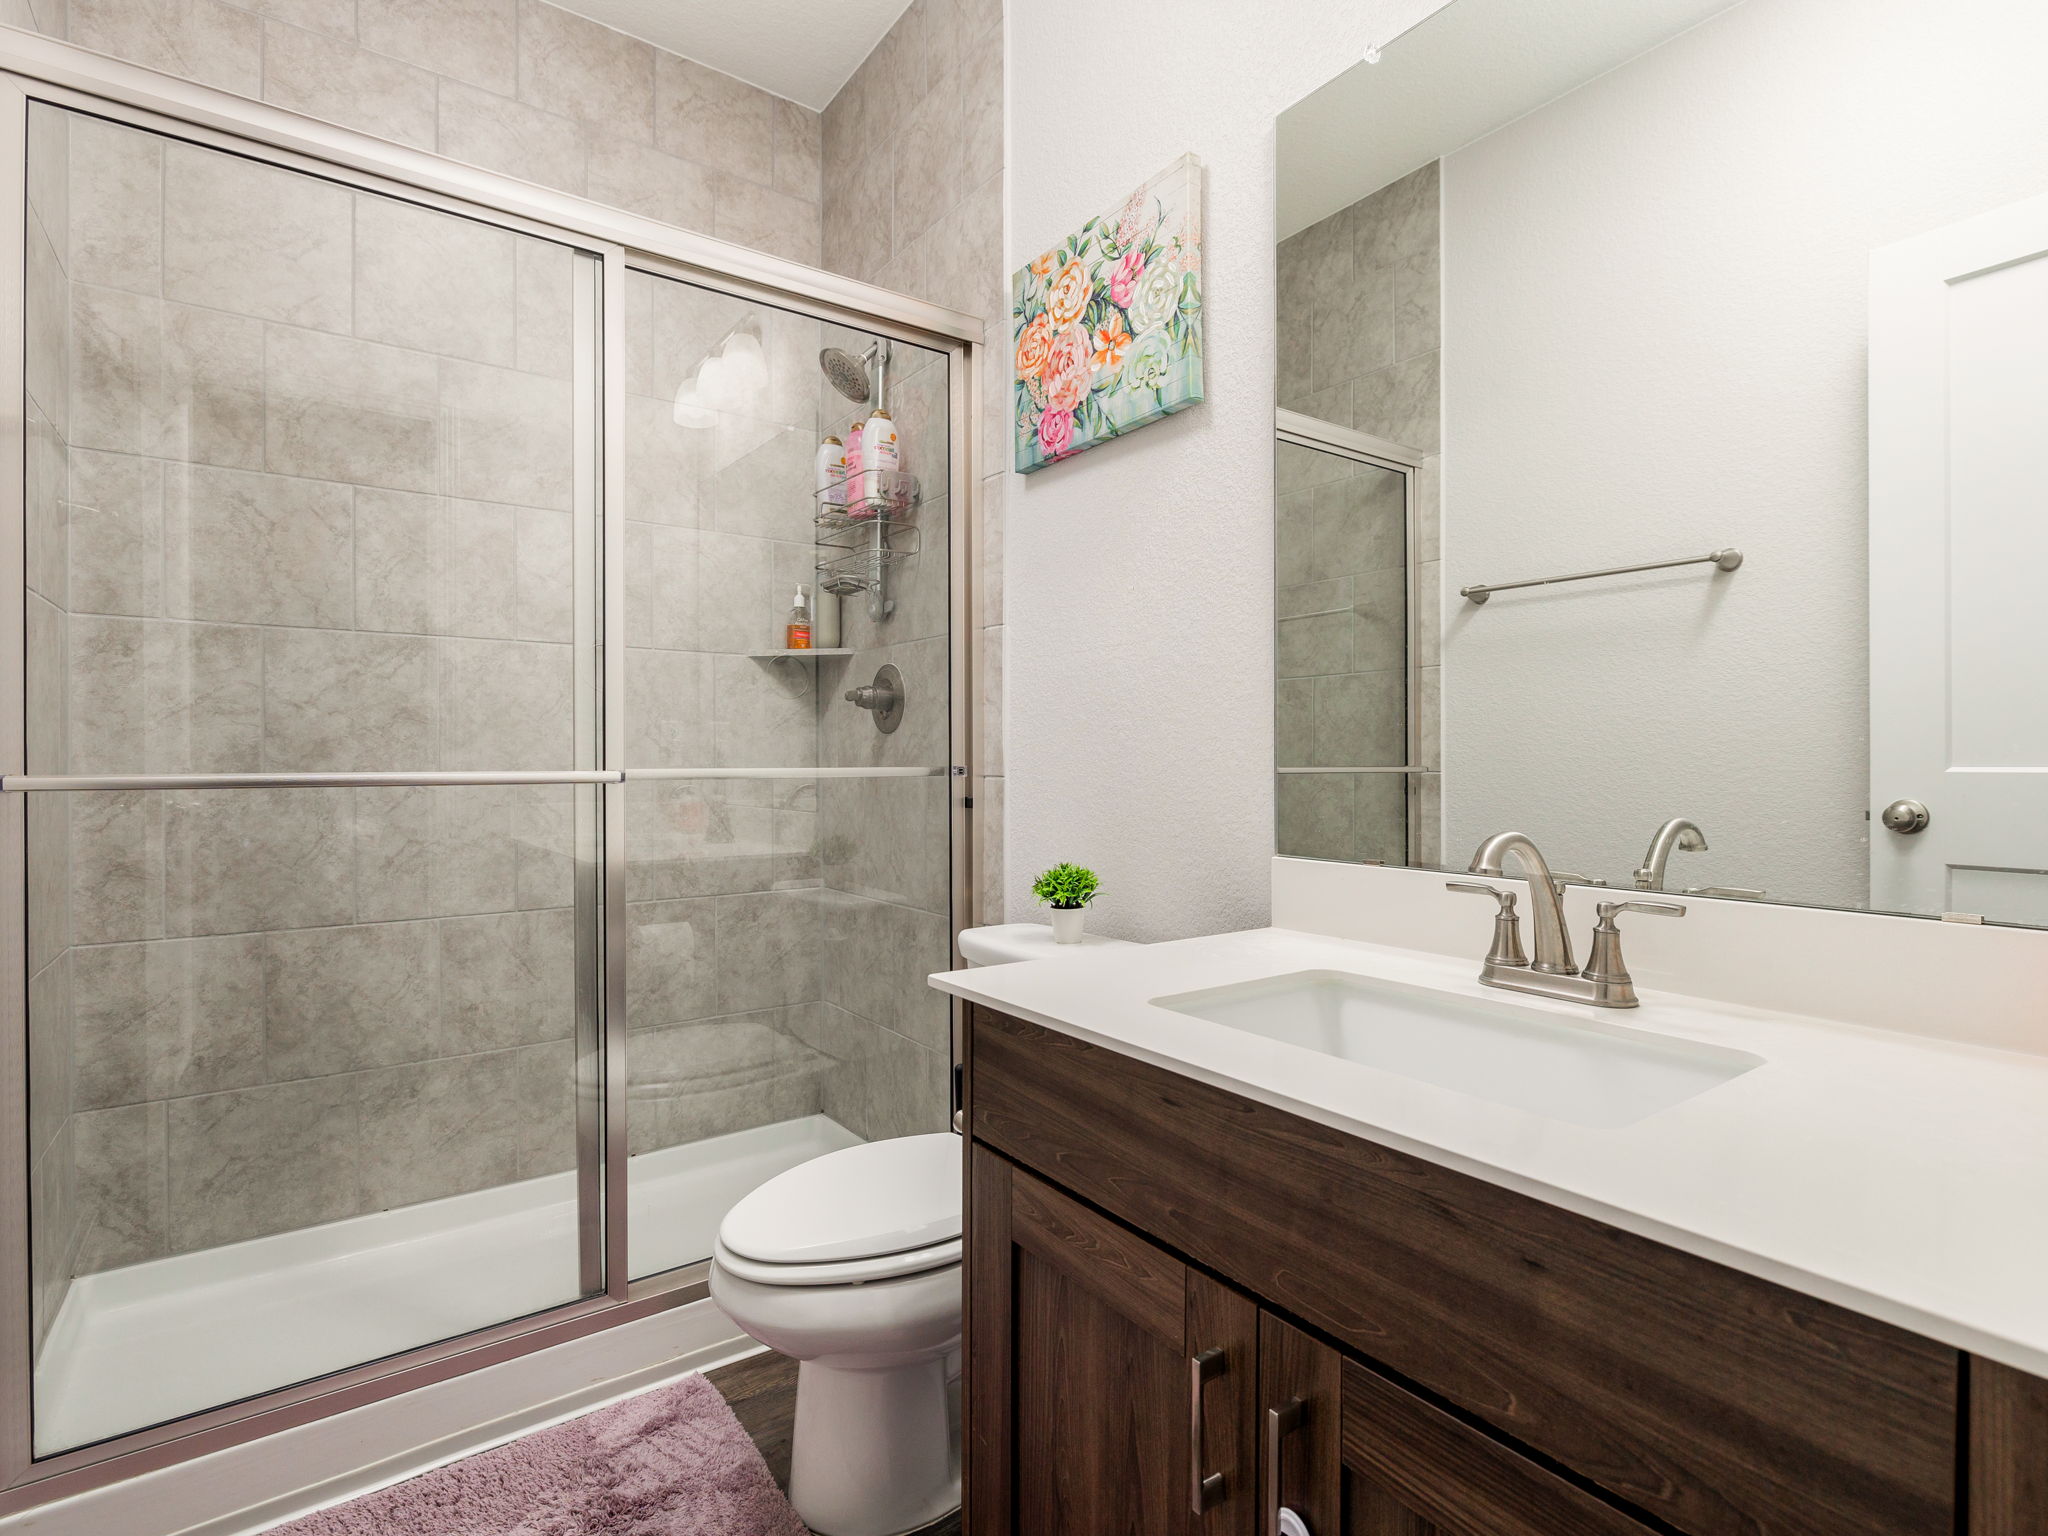 Walk in shower, floor to ceiling shower surround, and little extra counter top space...just in case its needed!